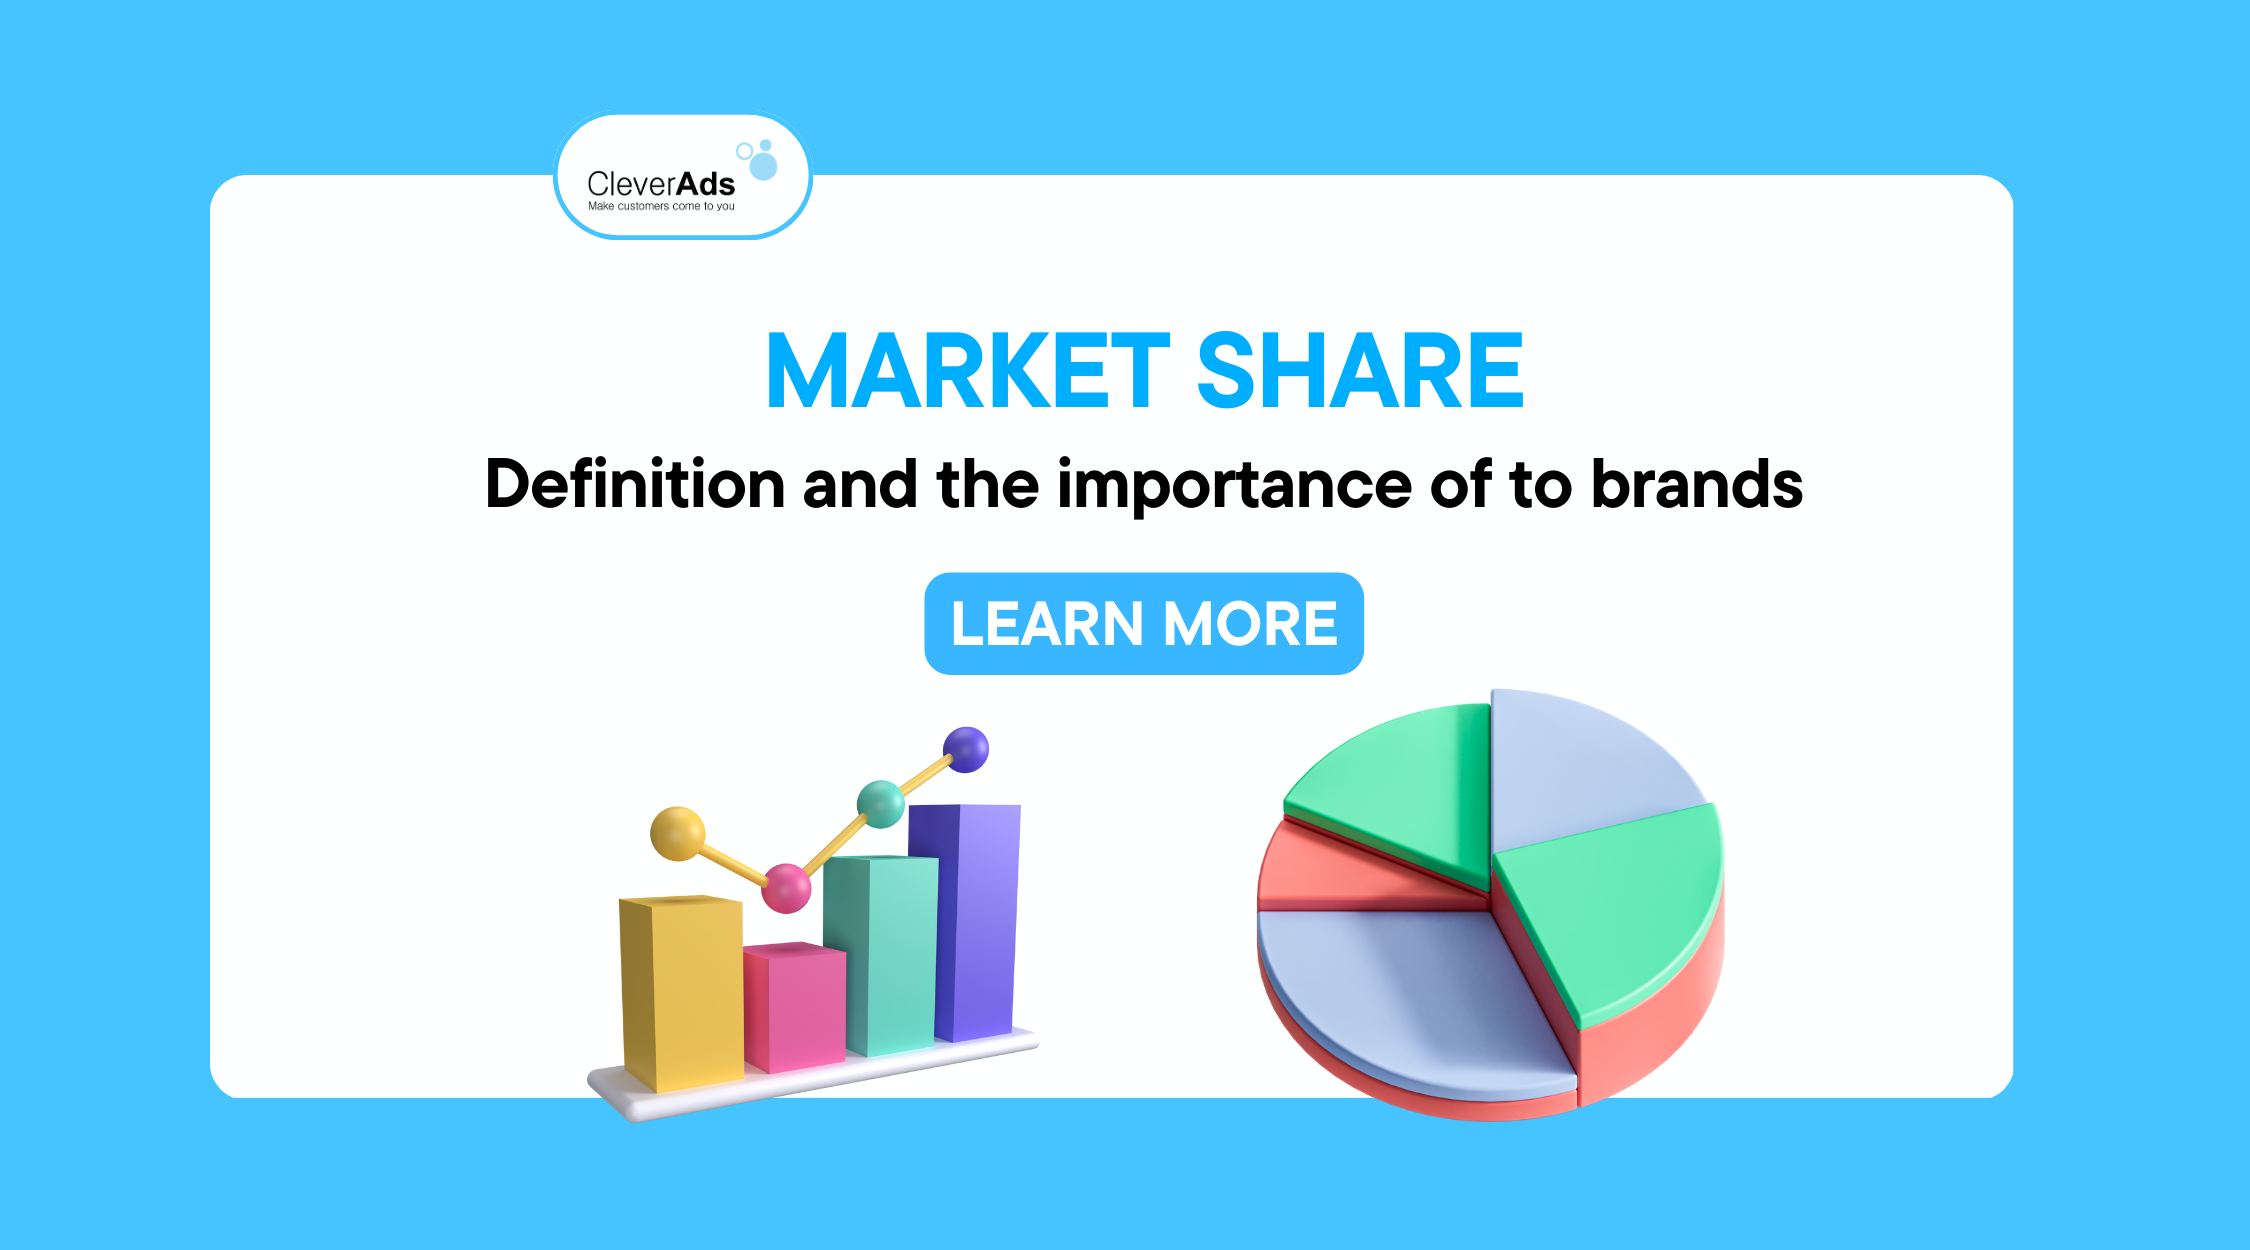 Market share: Definition and the importance of to brands